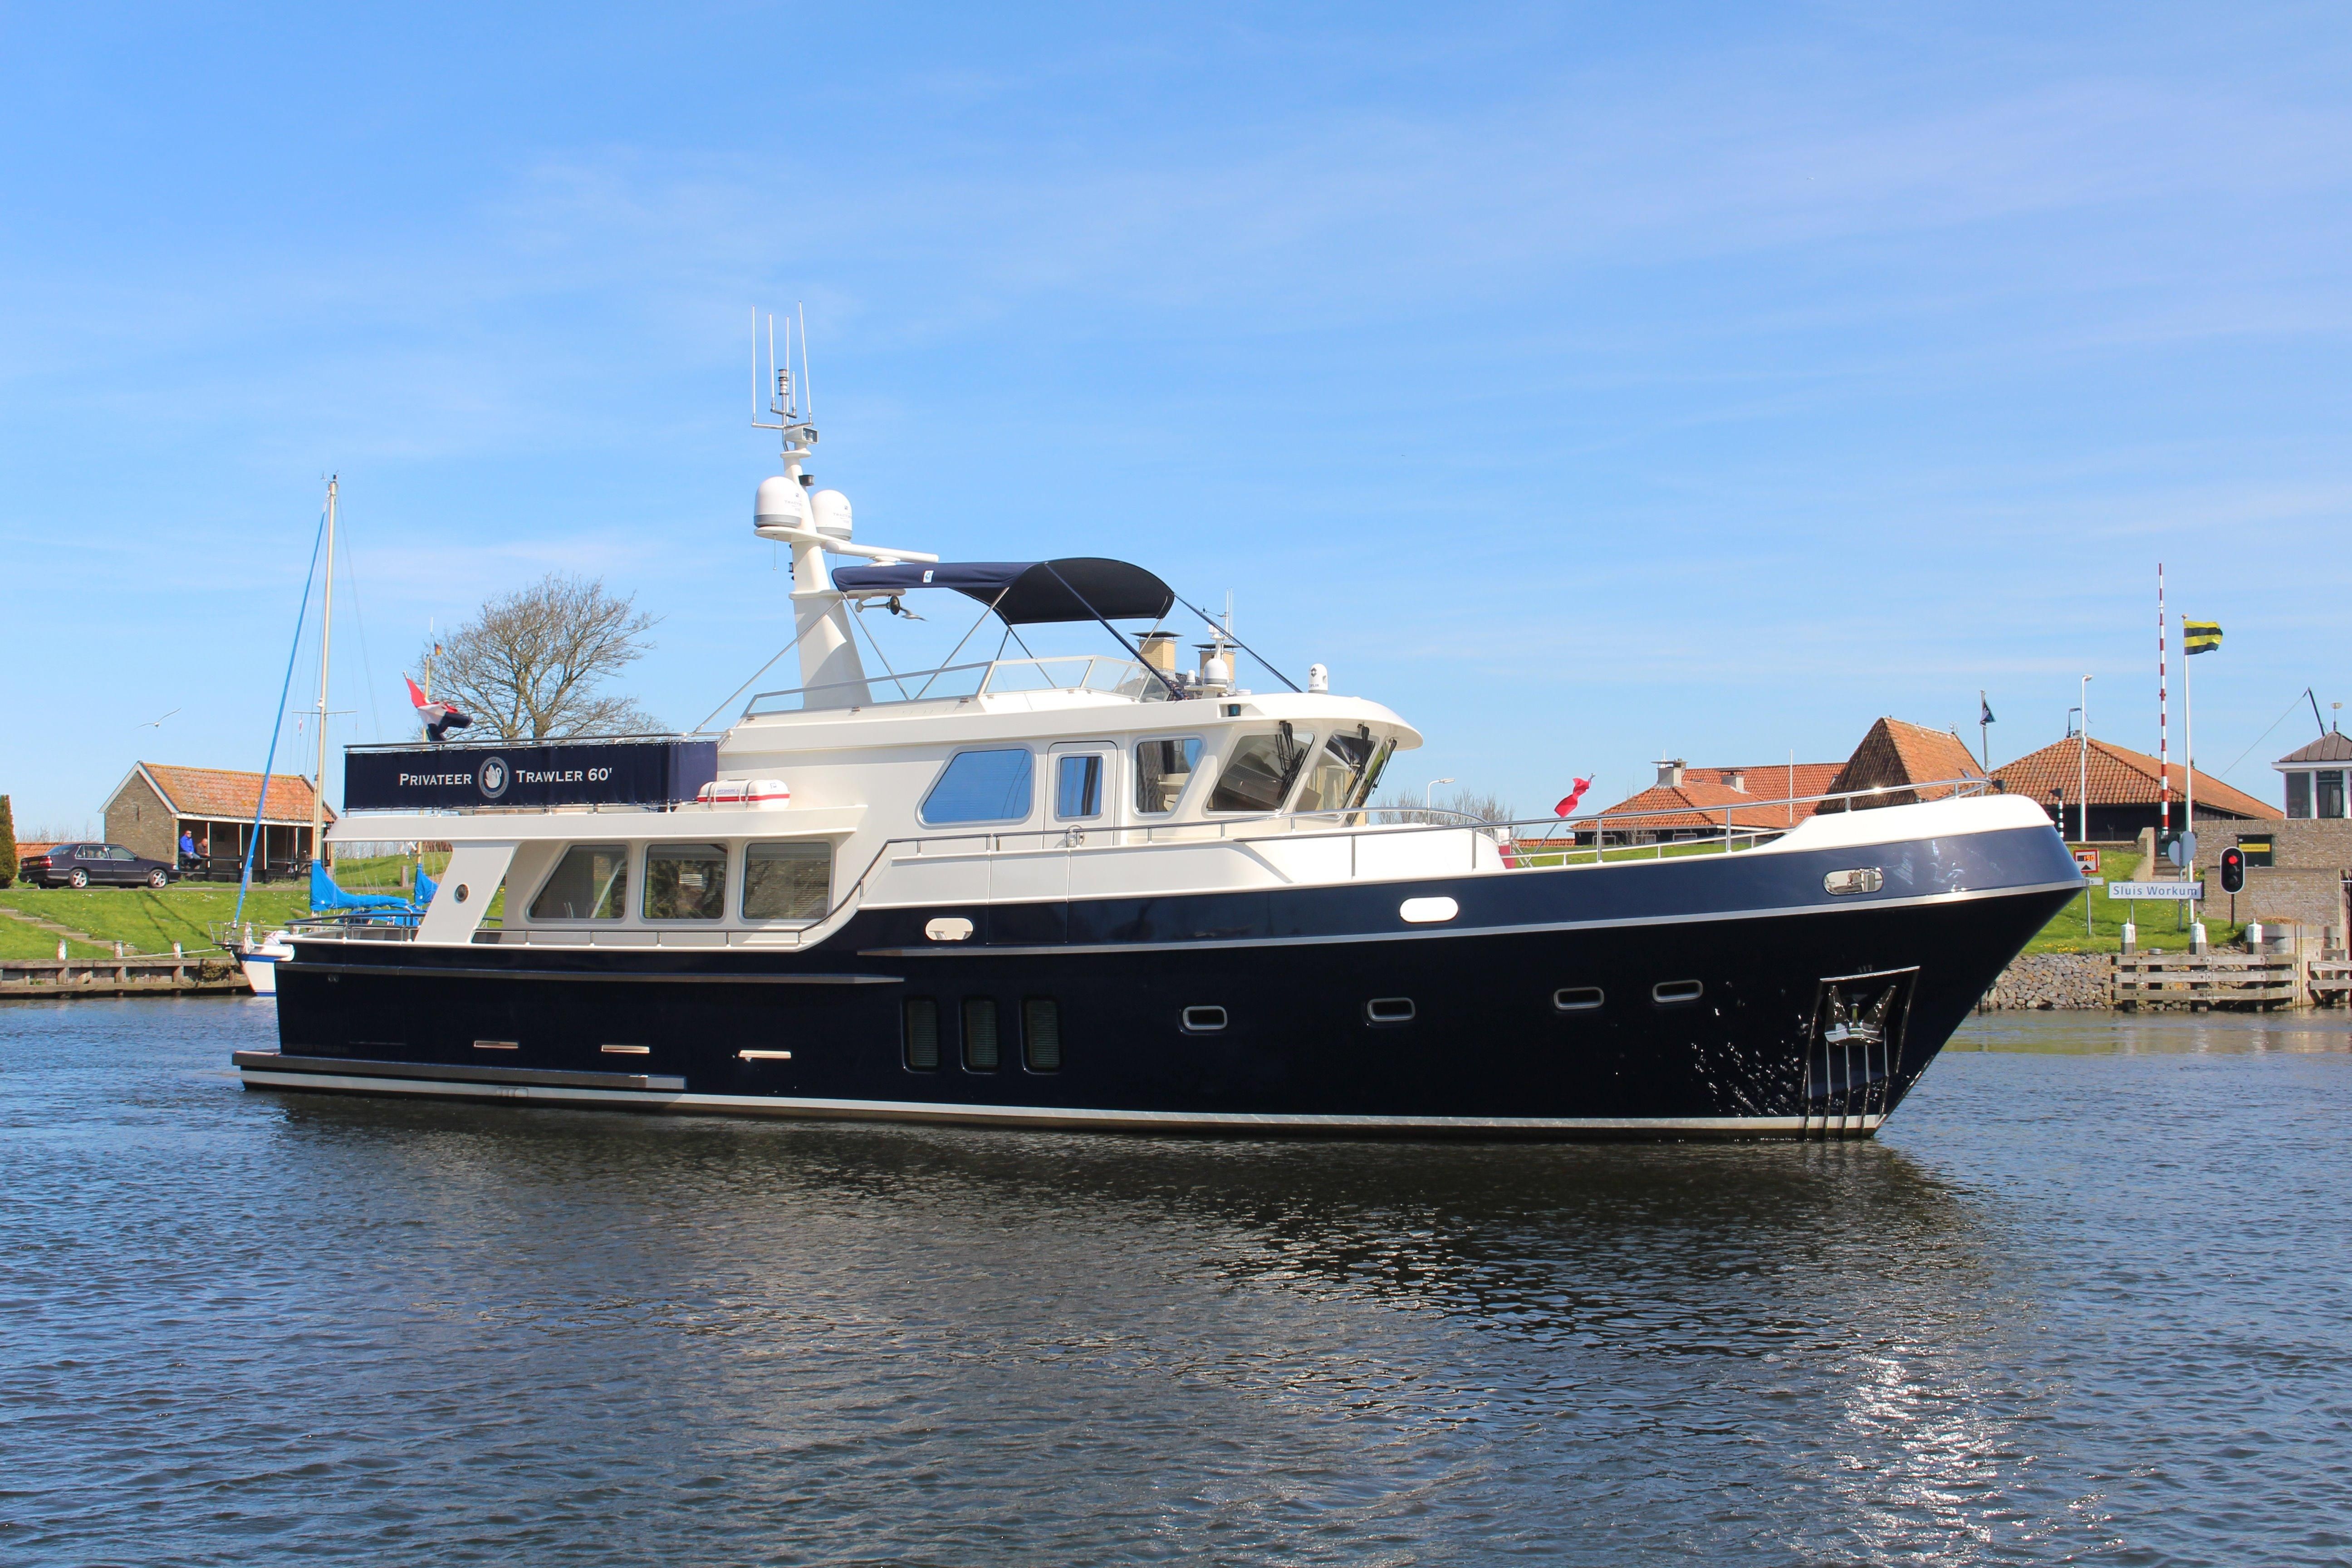 cheap used yachts for sale uk